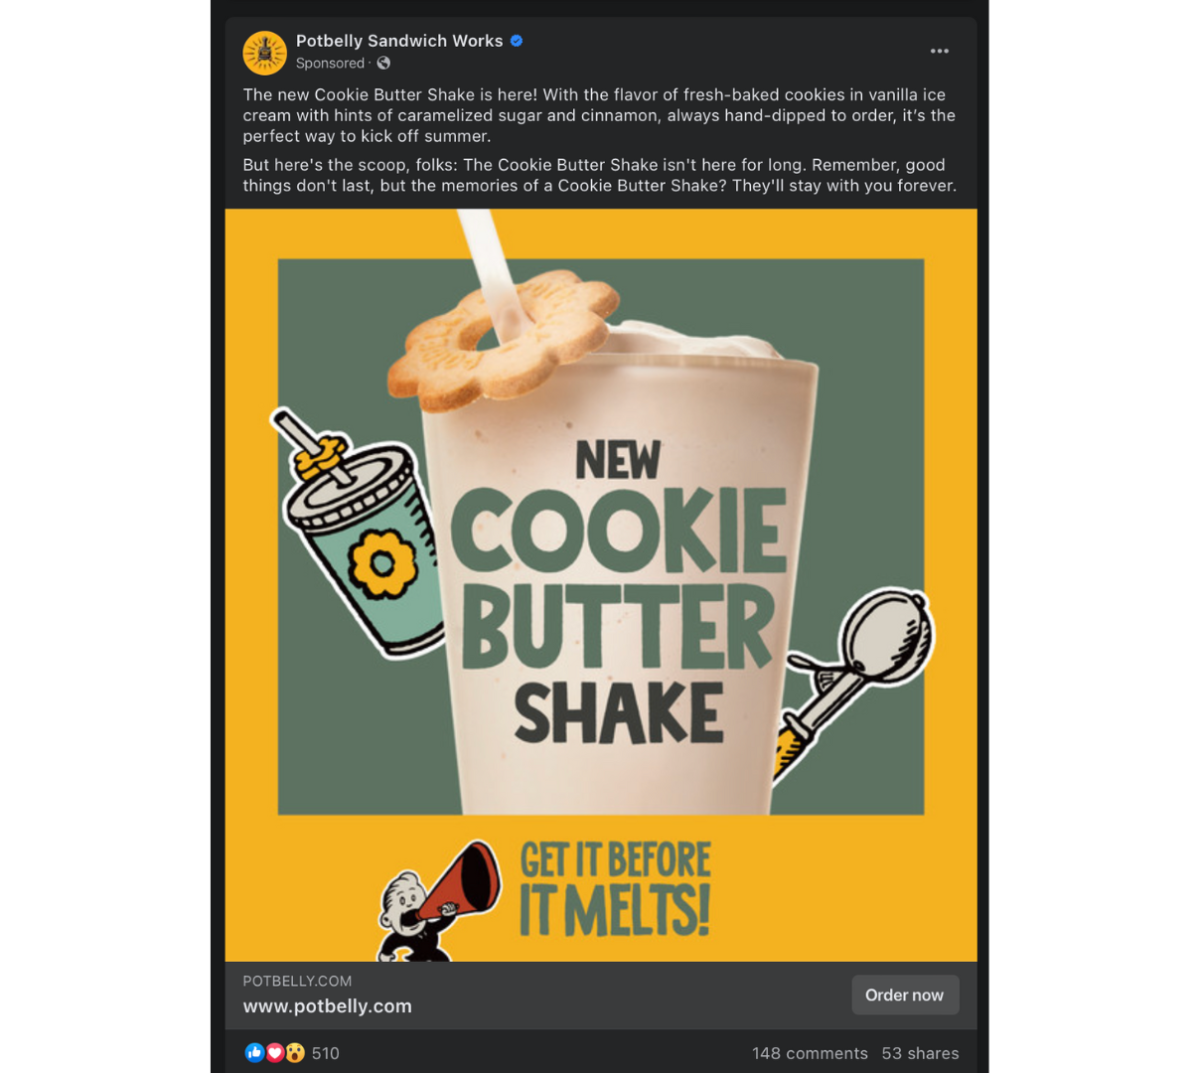 Potbelly Sandwich Facebook Ad featuring a cookie butter shake